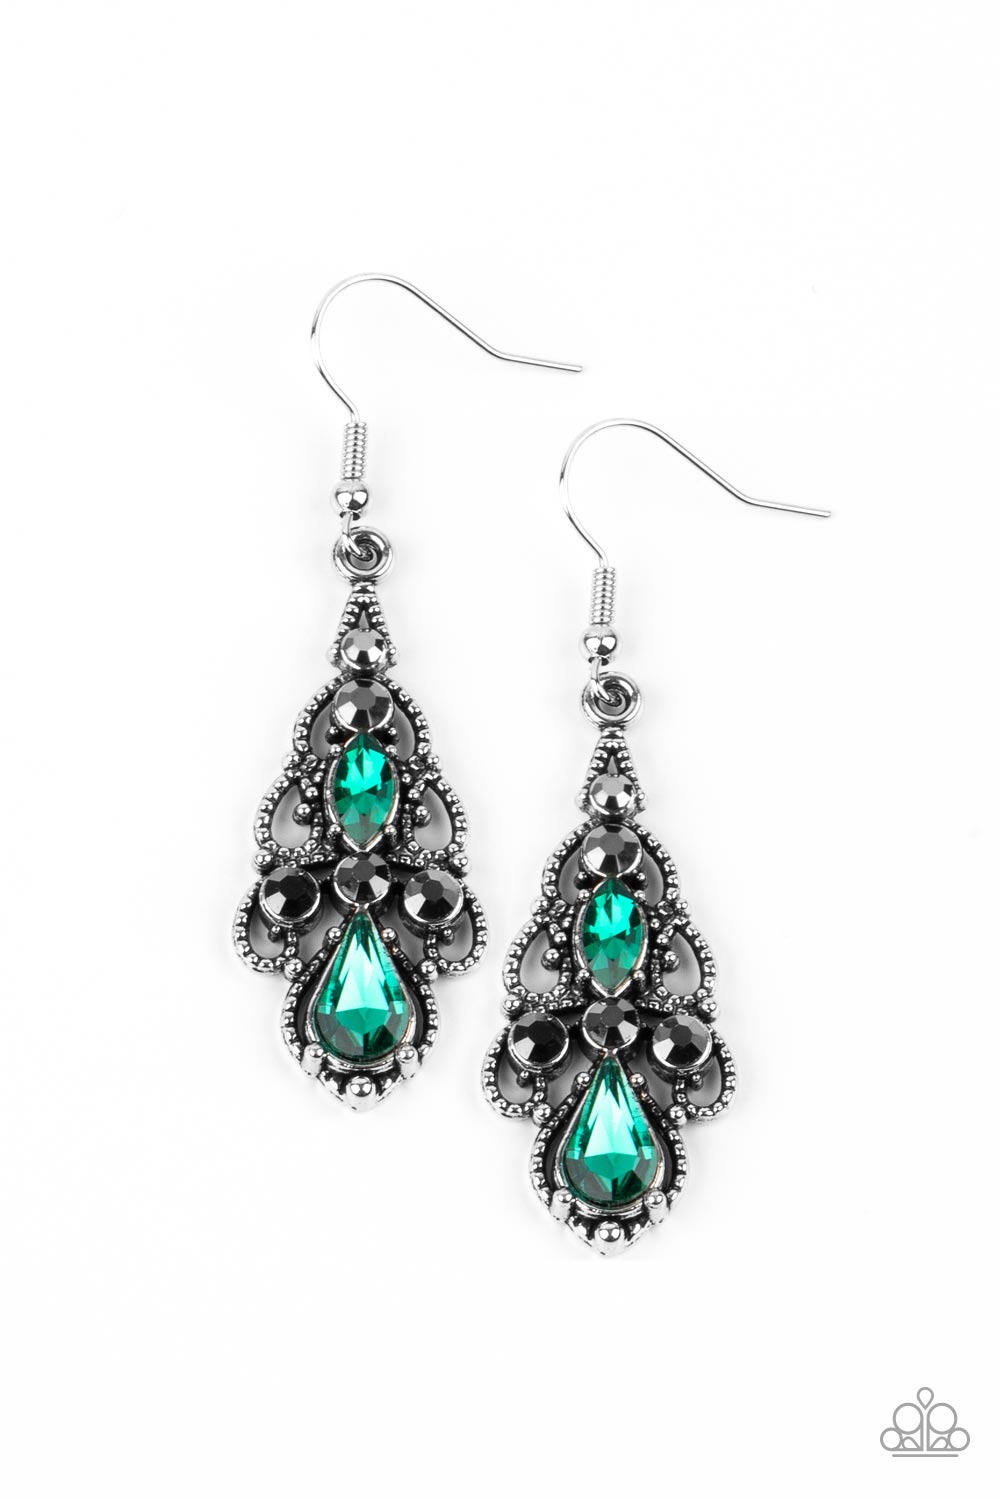 Urban Radiance Green Earring - Paparazzi Accessories  Embellished in mismatched green and hematite rhinestones, studded silver filigree swirls into an airy chandelier, creating a regal lure. Earring attaches to a standard fishhook fitting.  All Paparazzi Accessories are lead free and nickel free!  Sold as one pair of earrings.